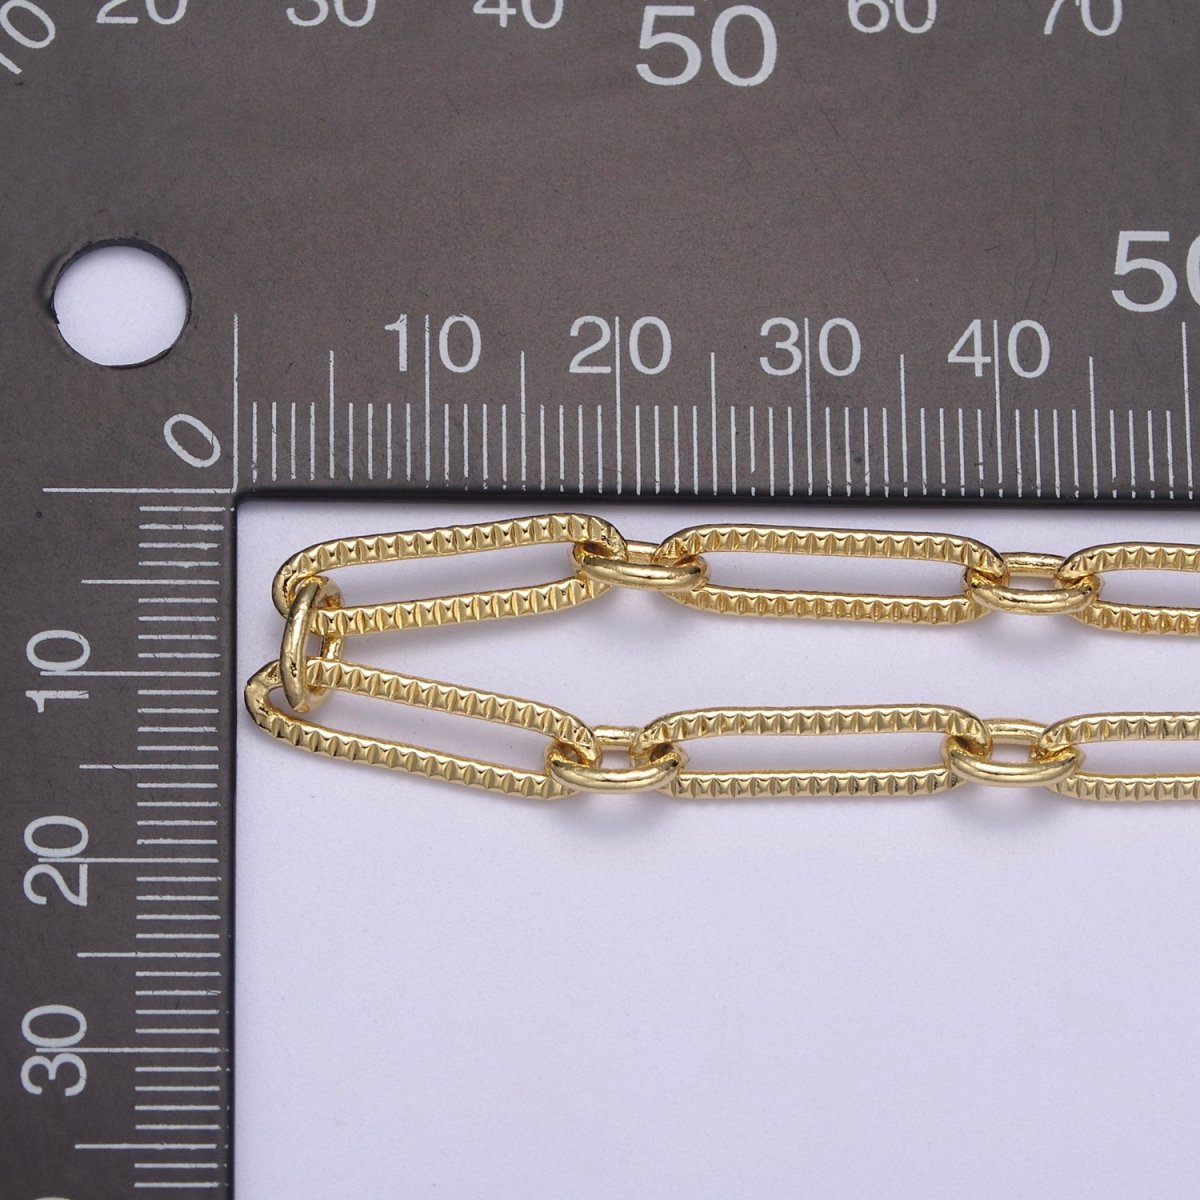 24k Gold Filled Gold Cable Paperclip Chain by Yard, Link Cable Thick Elongated Chain, Wholesale Bulk Roll Chain Jewelry Making, 18.7X5.1mm Textured Paper Clip Chain | ROLL-609, ROLL-610 Clearance Pricing - DLUXCA